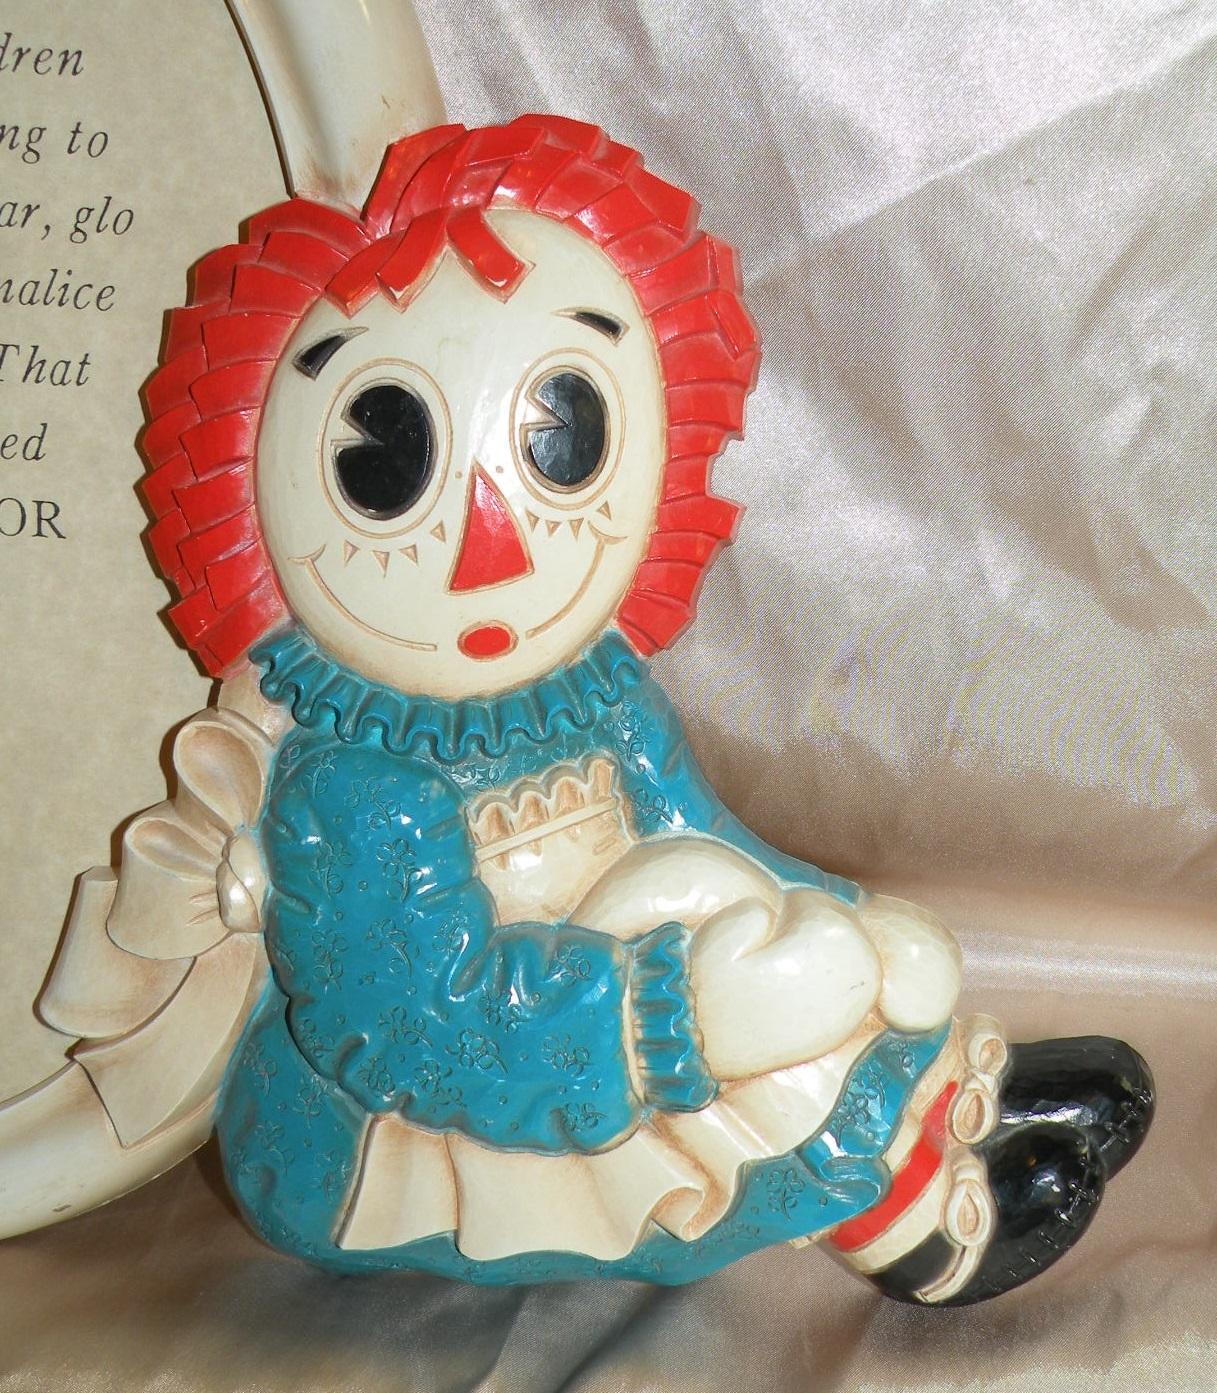 1977 RAGGEDY ANN & ANDY PLASTIC PICTURE FRAME - THE GRUELLE IDEAL SAYING